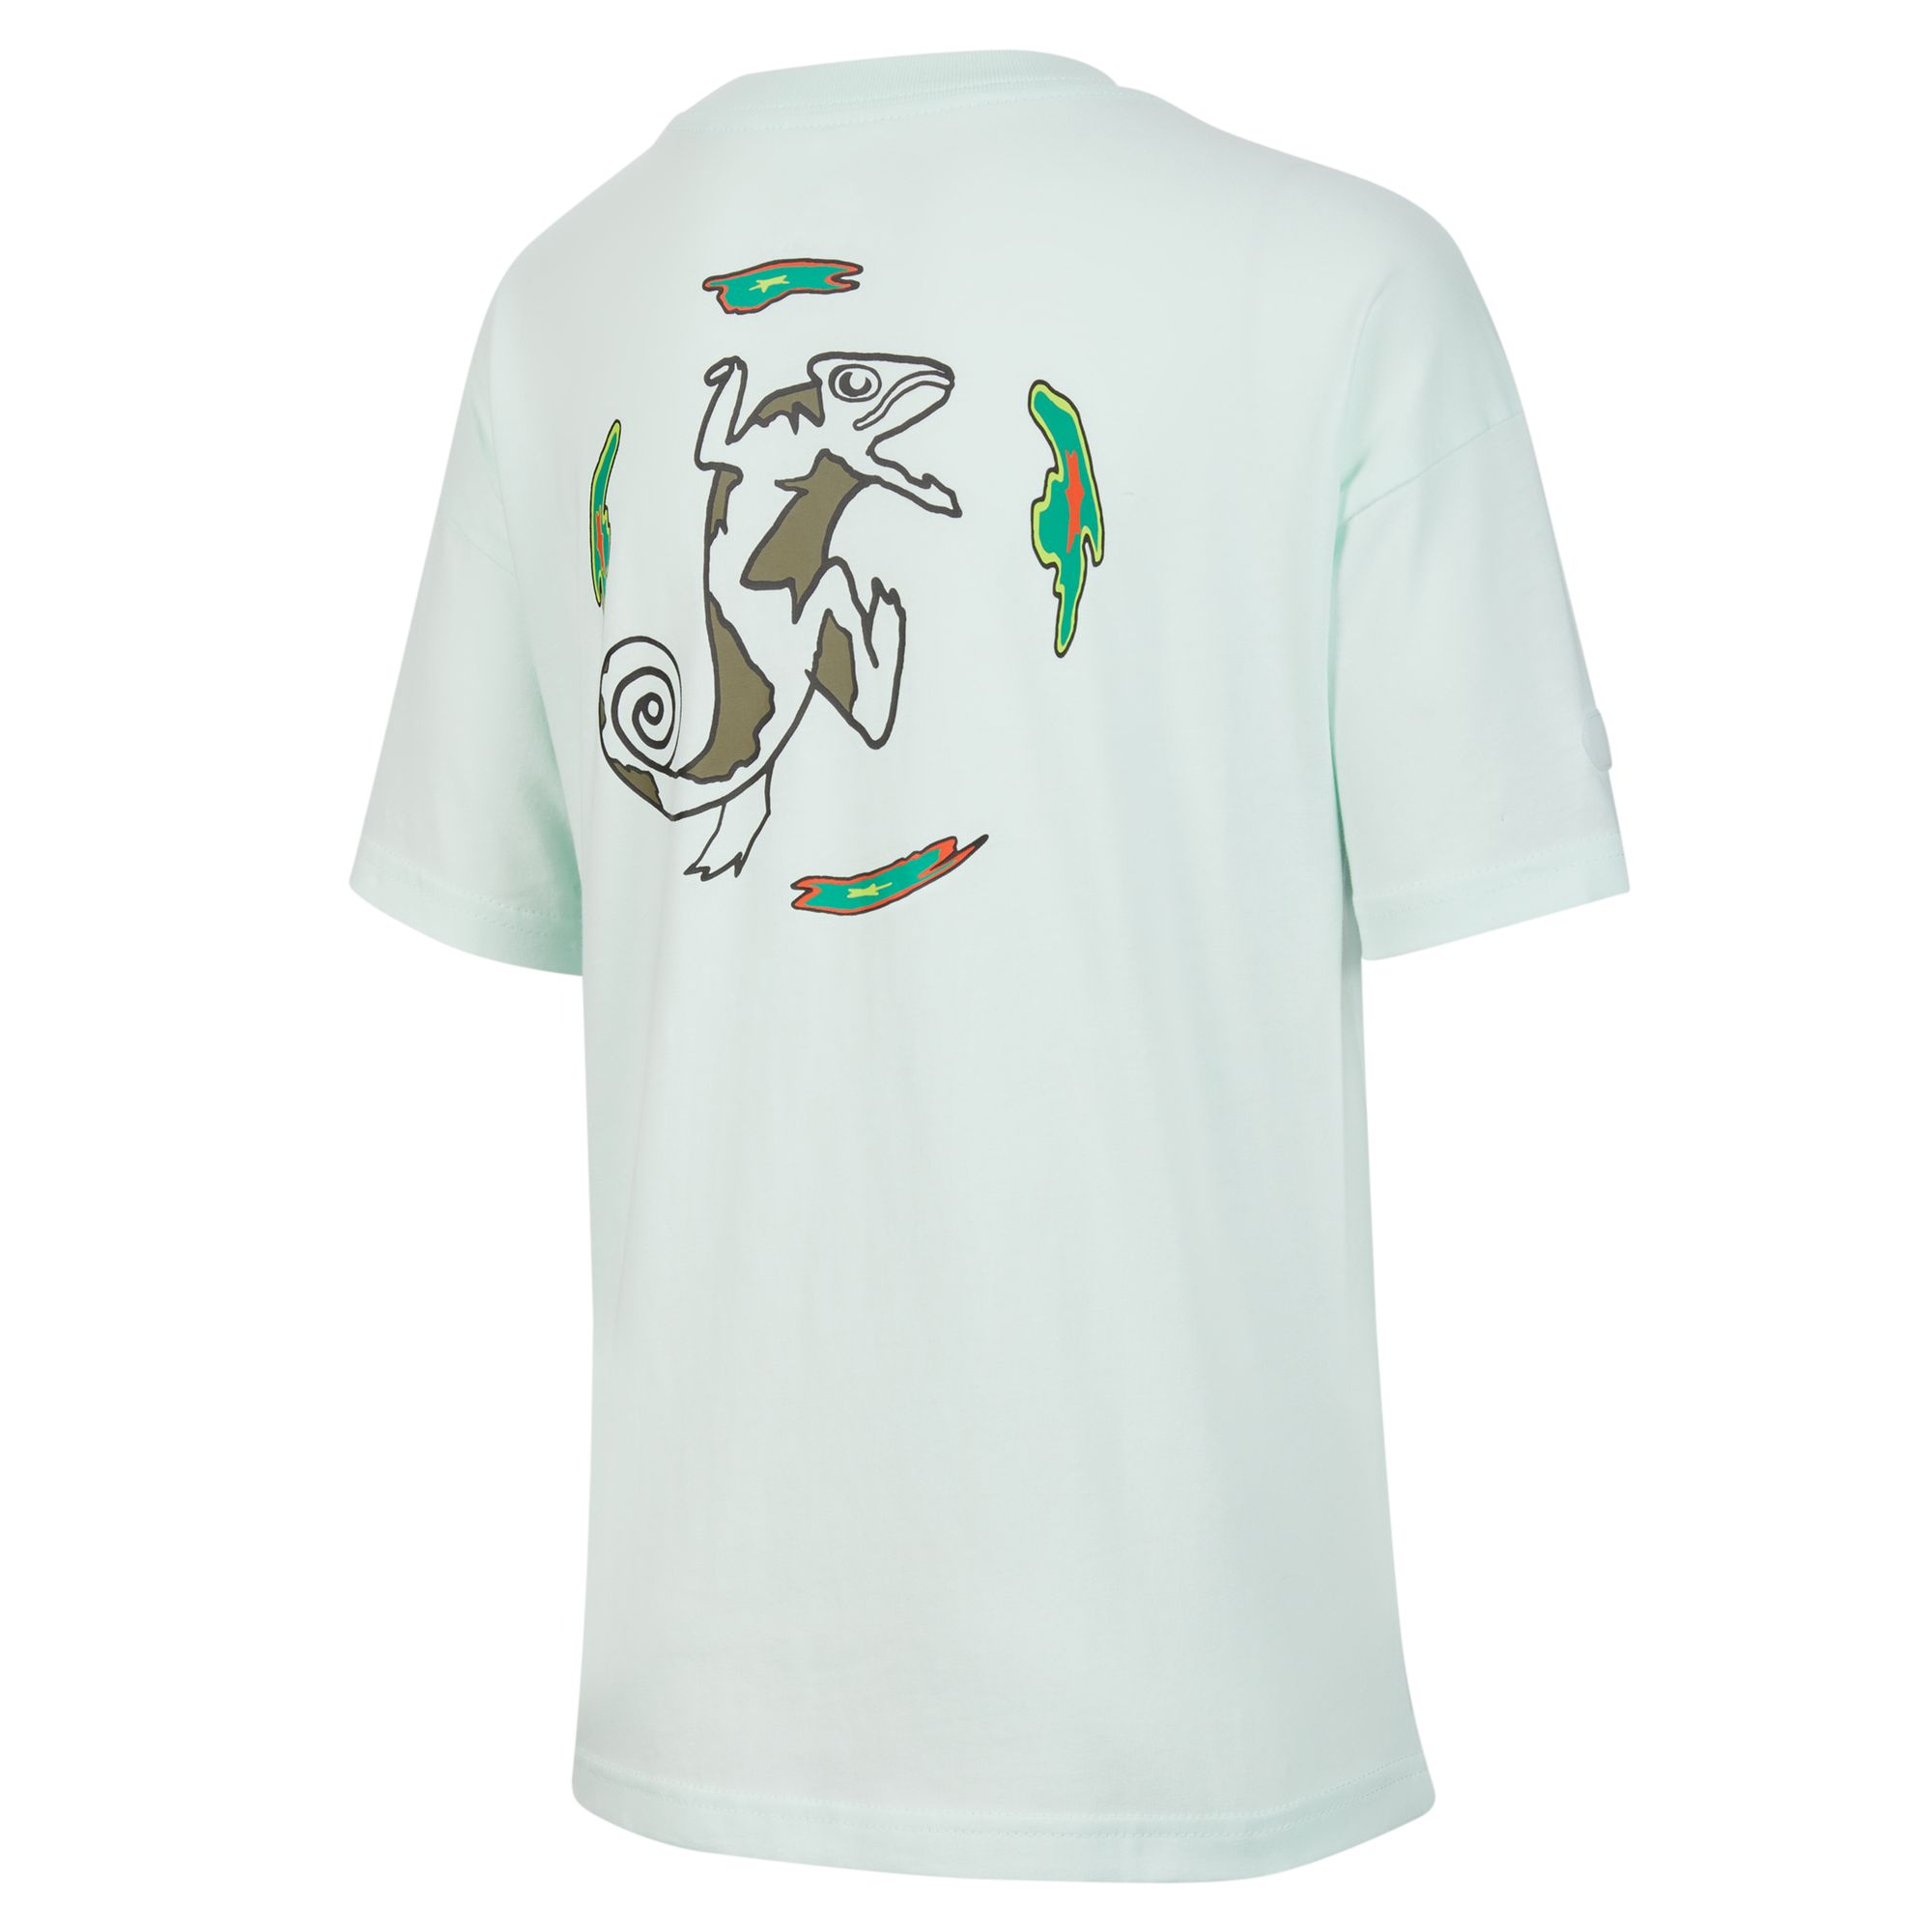 【YOUTH】NIKE SB FED AGN S/S Tシャツ